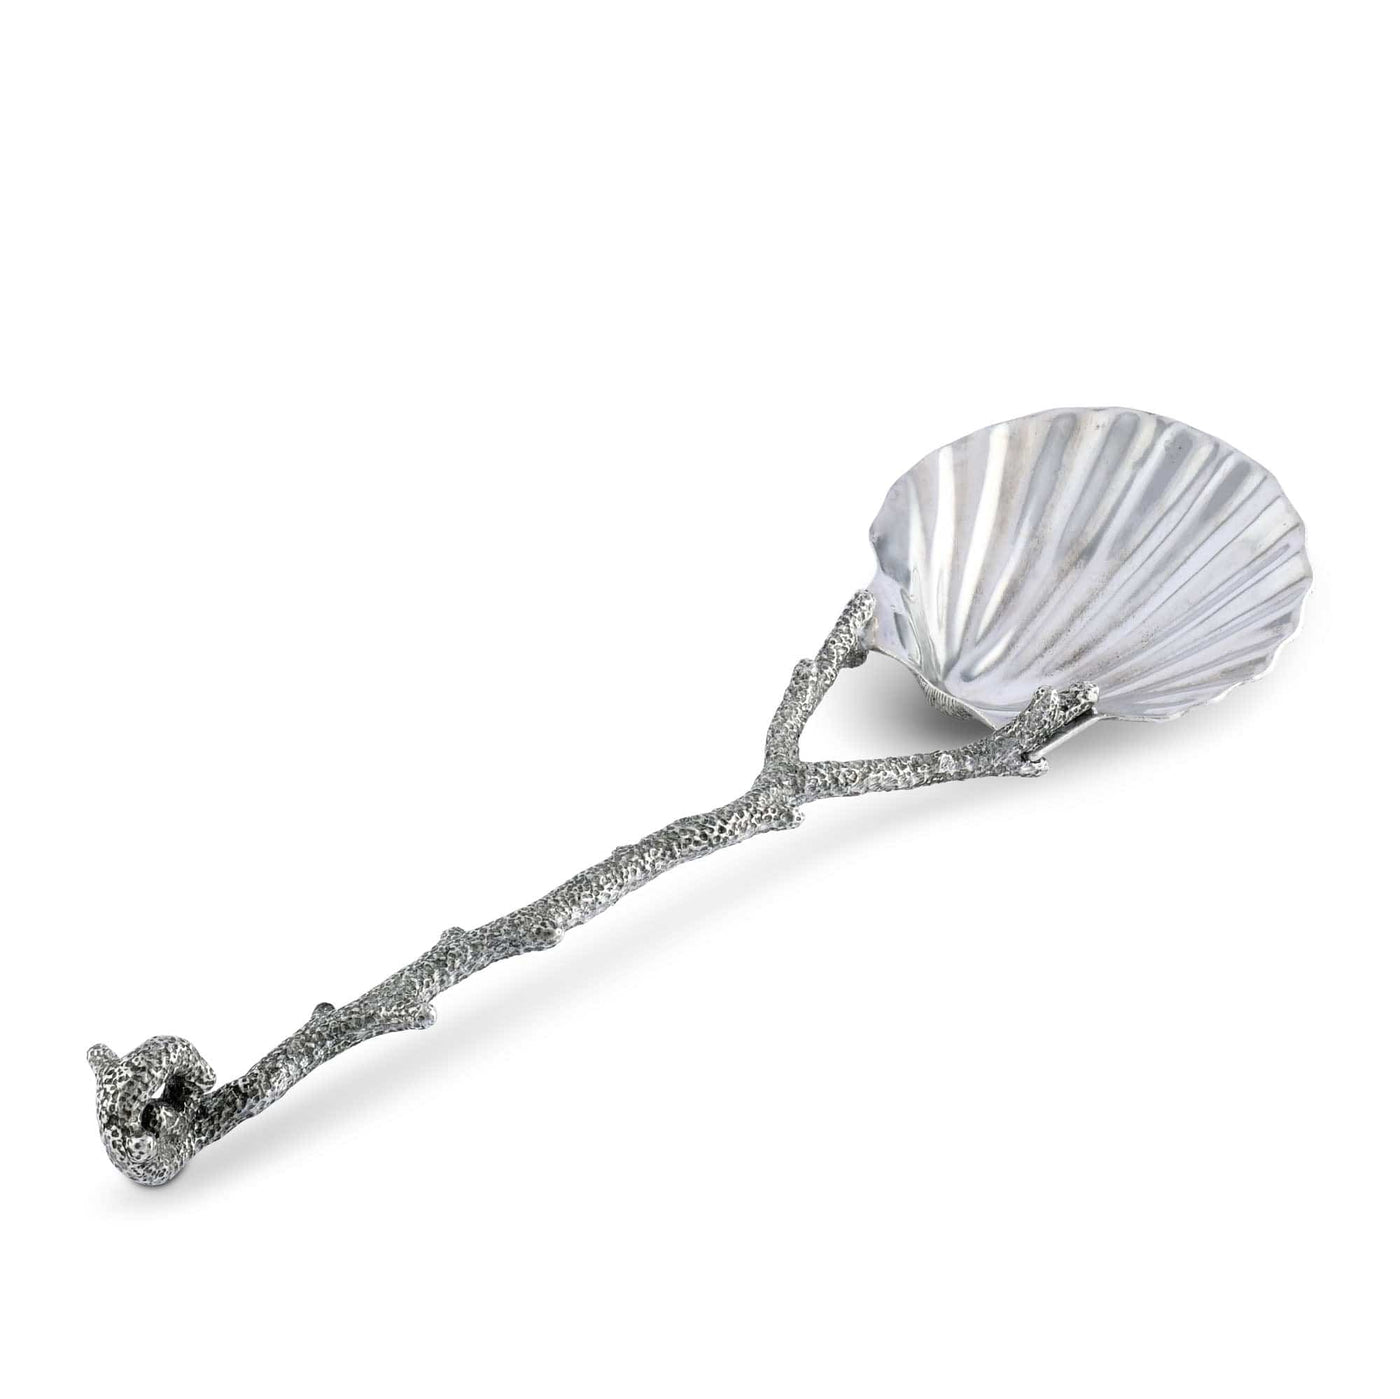 Scallop Shell Coral Serving Spoon